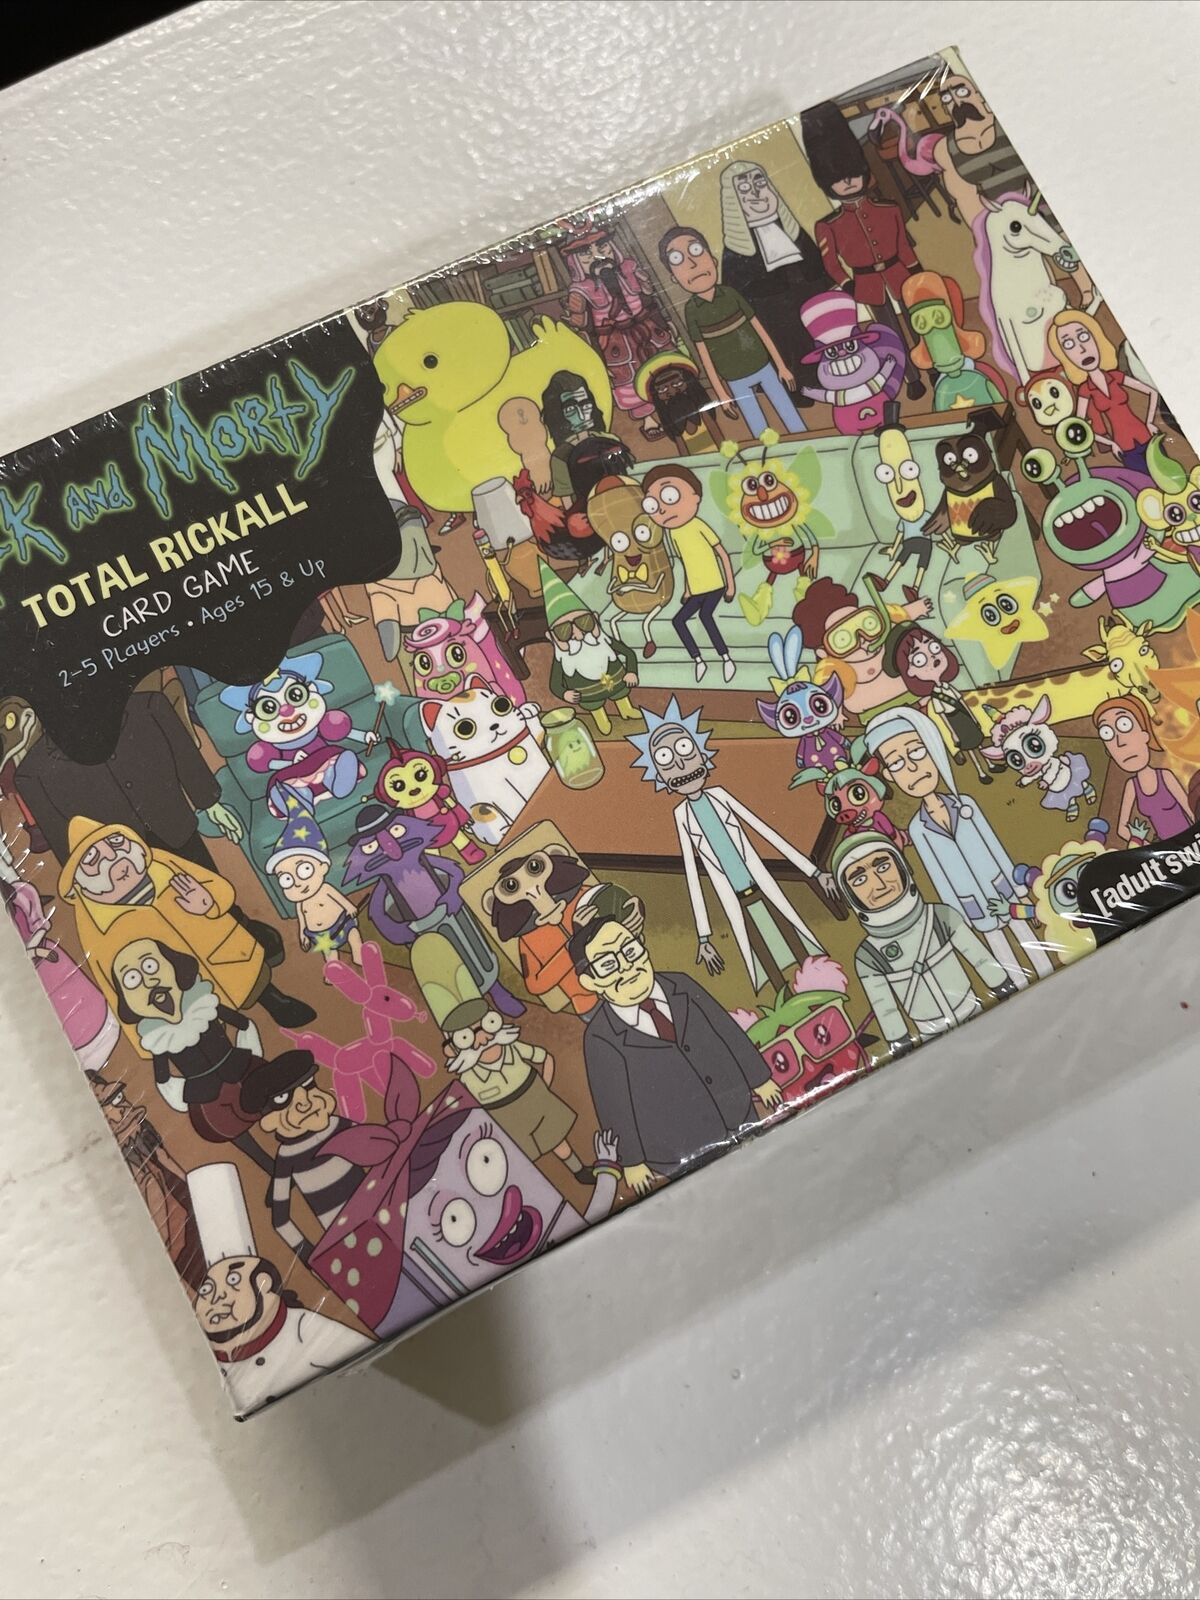 RICK AND MORTY TOTAL RICKALL COLLECTIBLE CARD GAME , Sealed New In Box